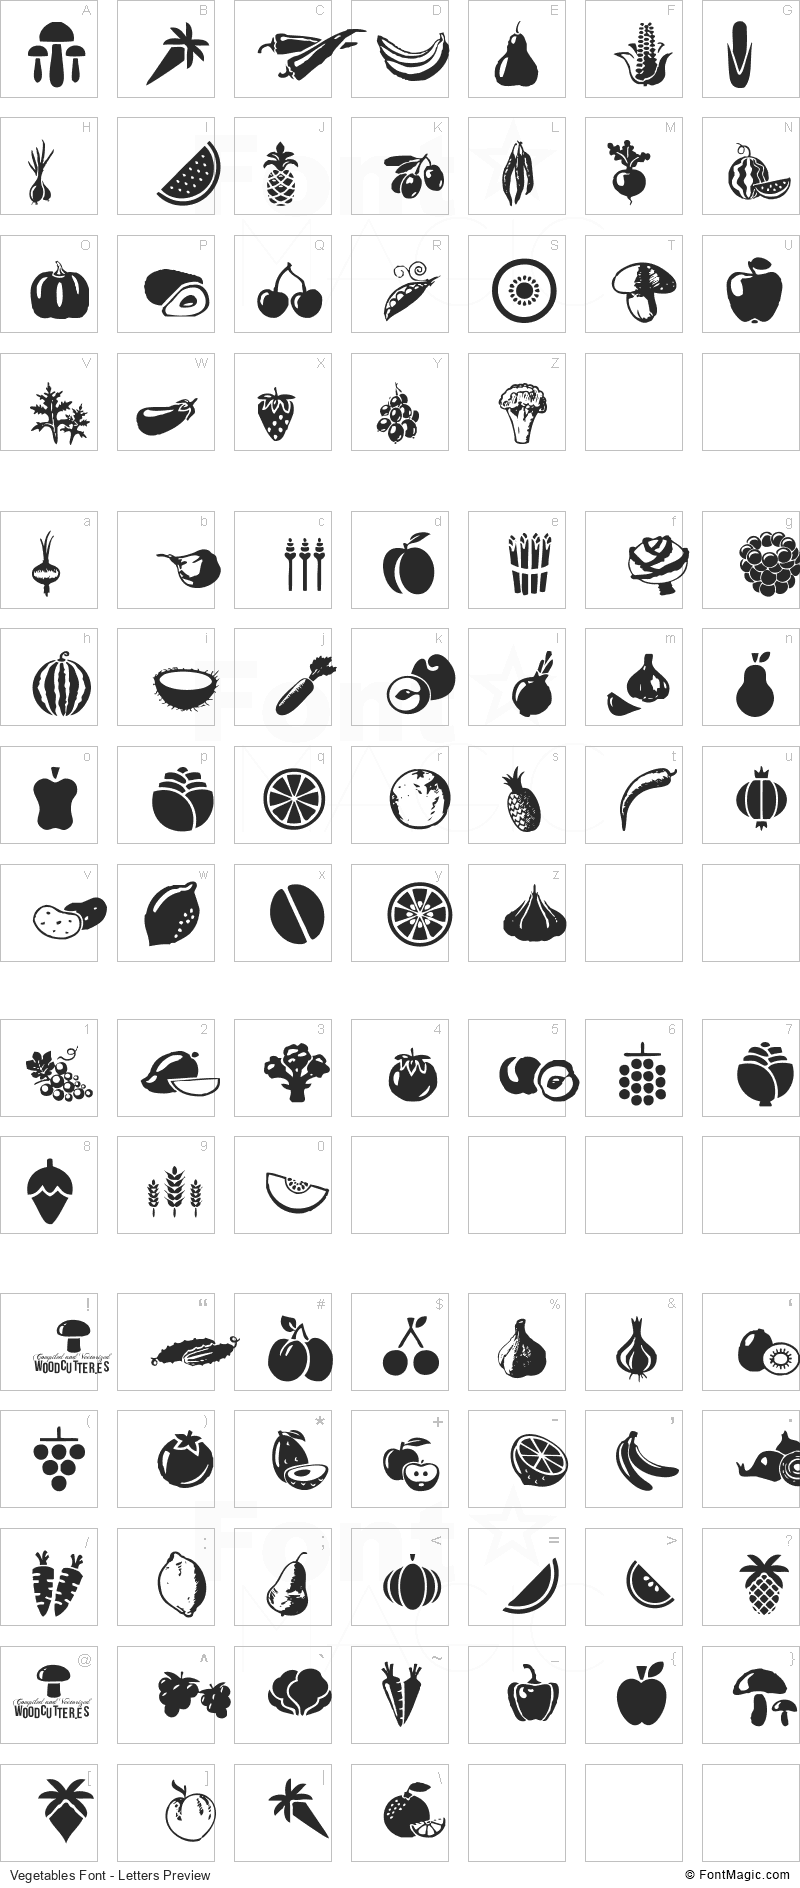 Vegetables Font - All Latters Preview Chart